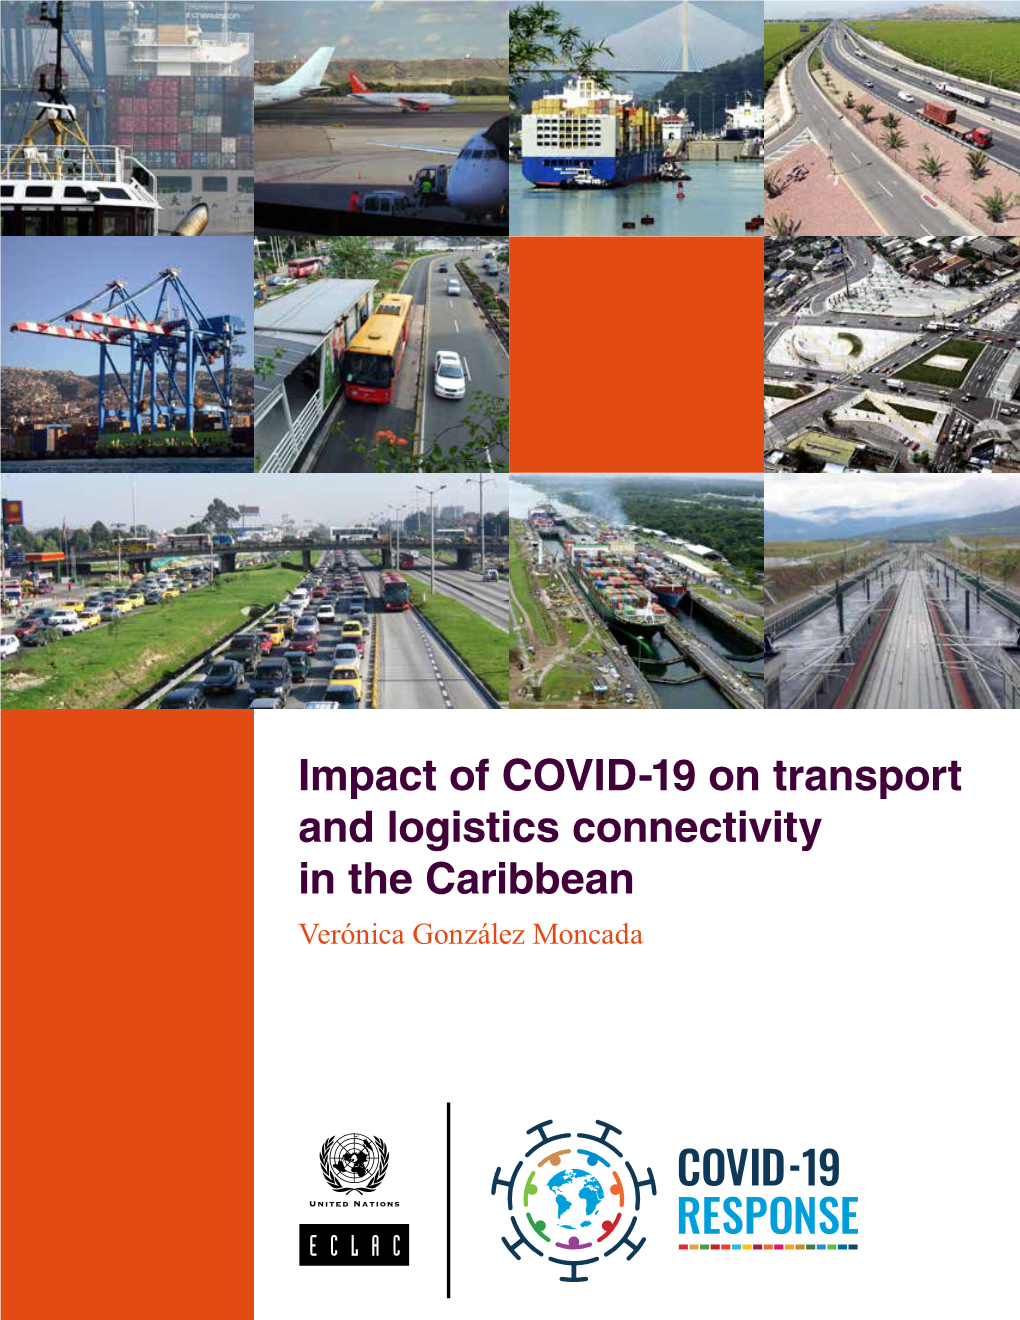 Impact of COVID-19 on Transport and Logistics Connectivity in the Caribbean Verónica González Moncada Thank You for Your Interest in This ECLAC Publication